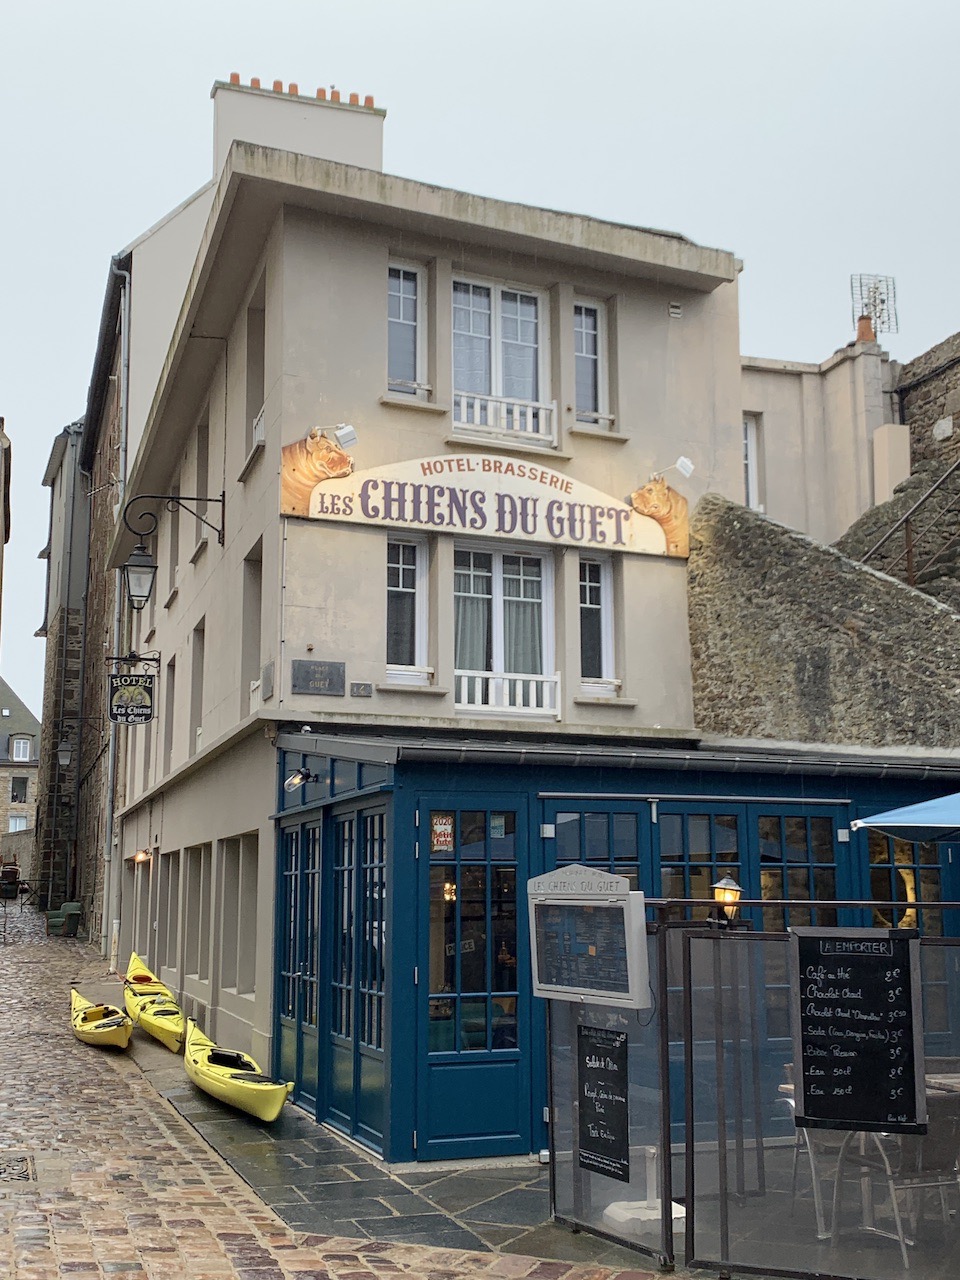 Looking for a Budget Hotel in Saint-Malo?